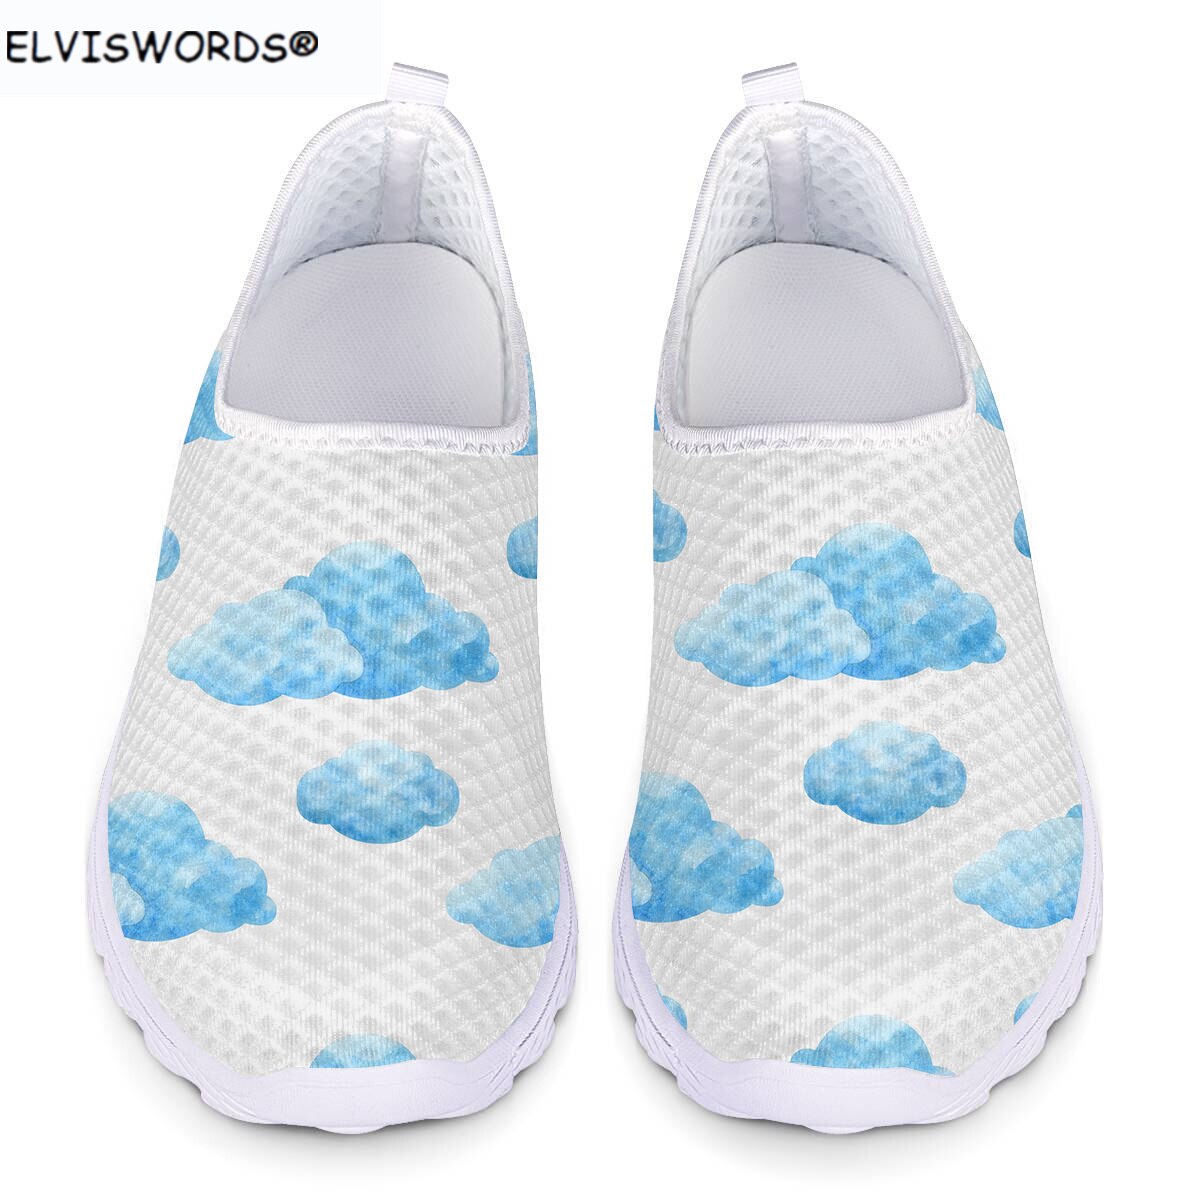 ELVISWORDS Cloud Pattern Casual Ladies Mesh Sneakers Comfortable Women's Walking Shoes Breathable Female Flats Shoes Loafers